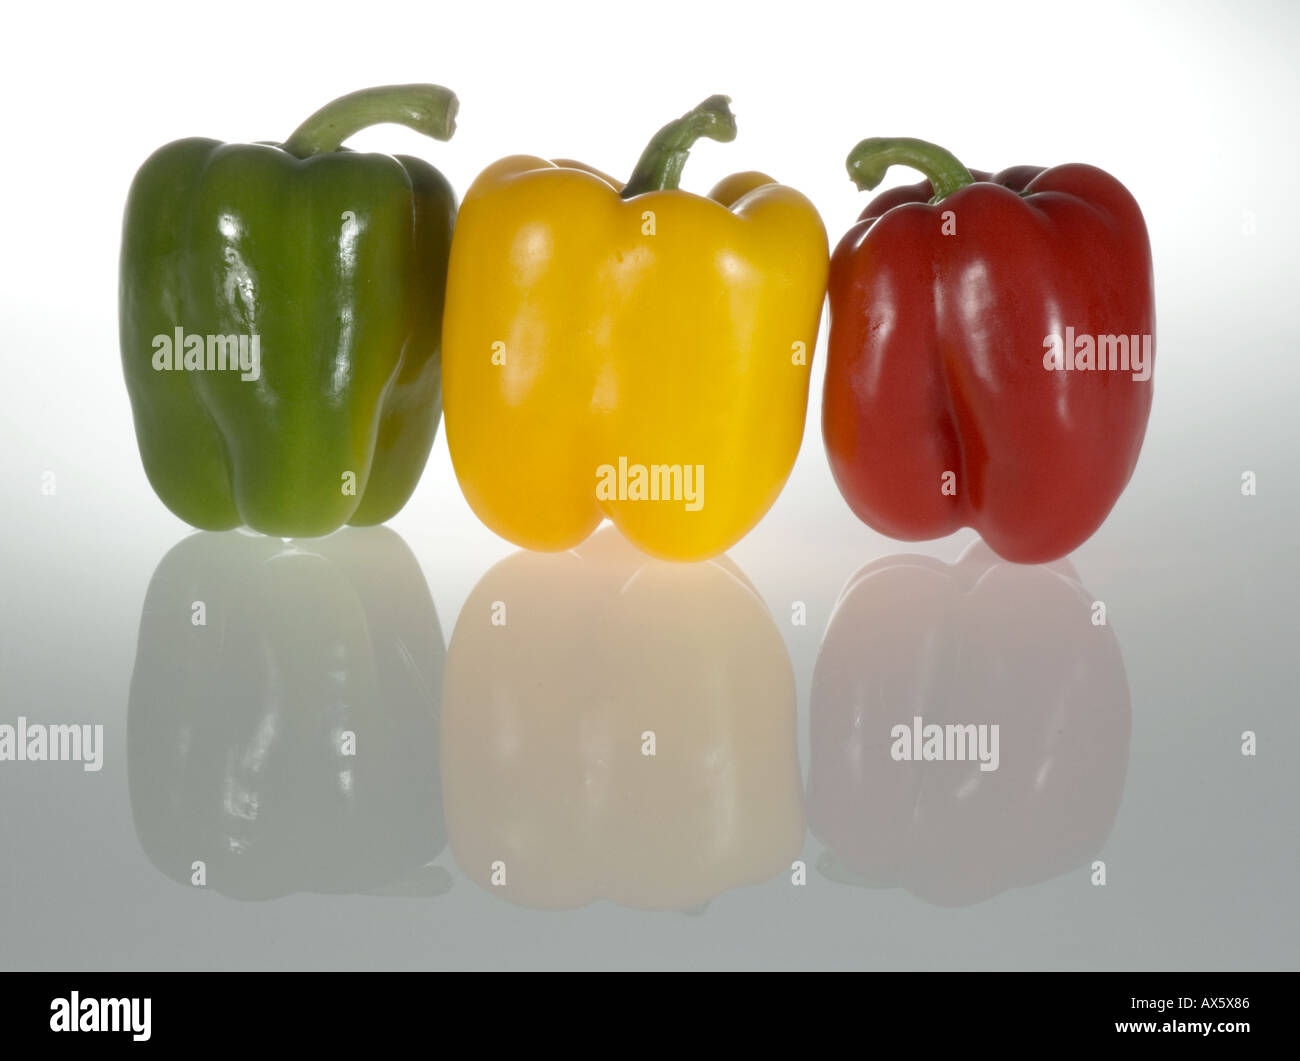 A selection of uncooked/raw peppers Stock Photo